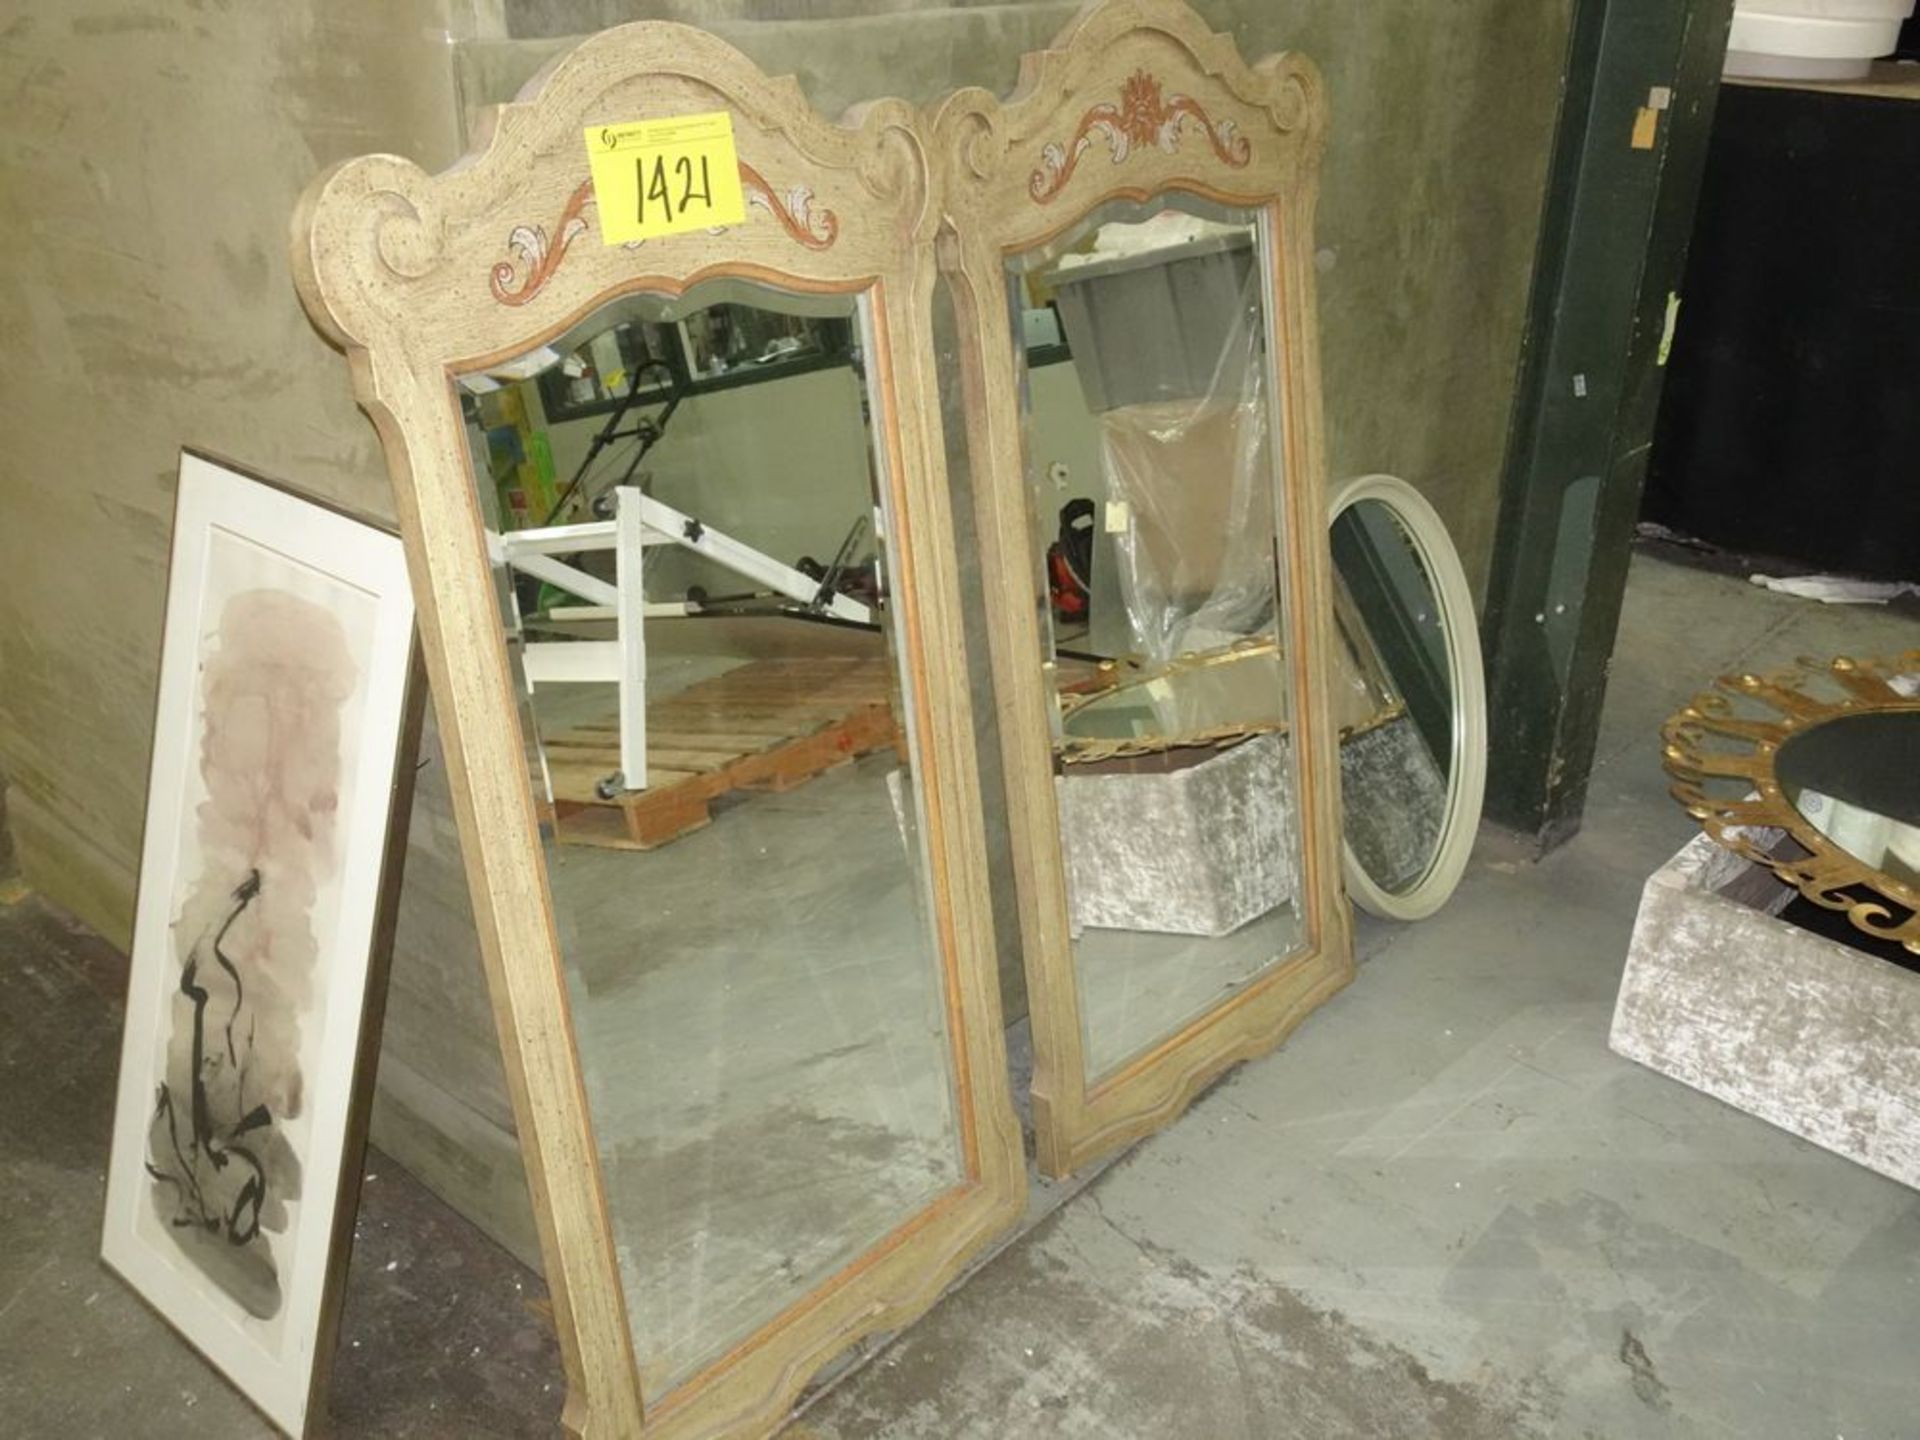 PAIR OF MIRRORS - WOOD FRAME, BEVELLED GLASS - Image 2 of 2